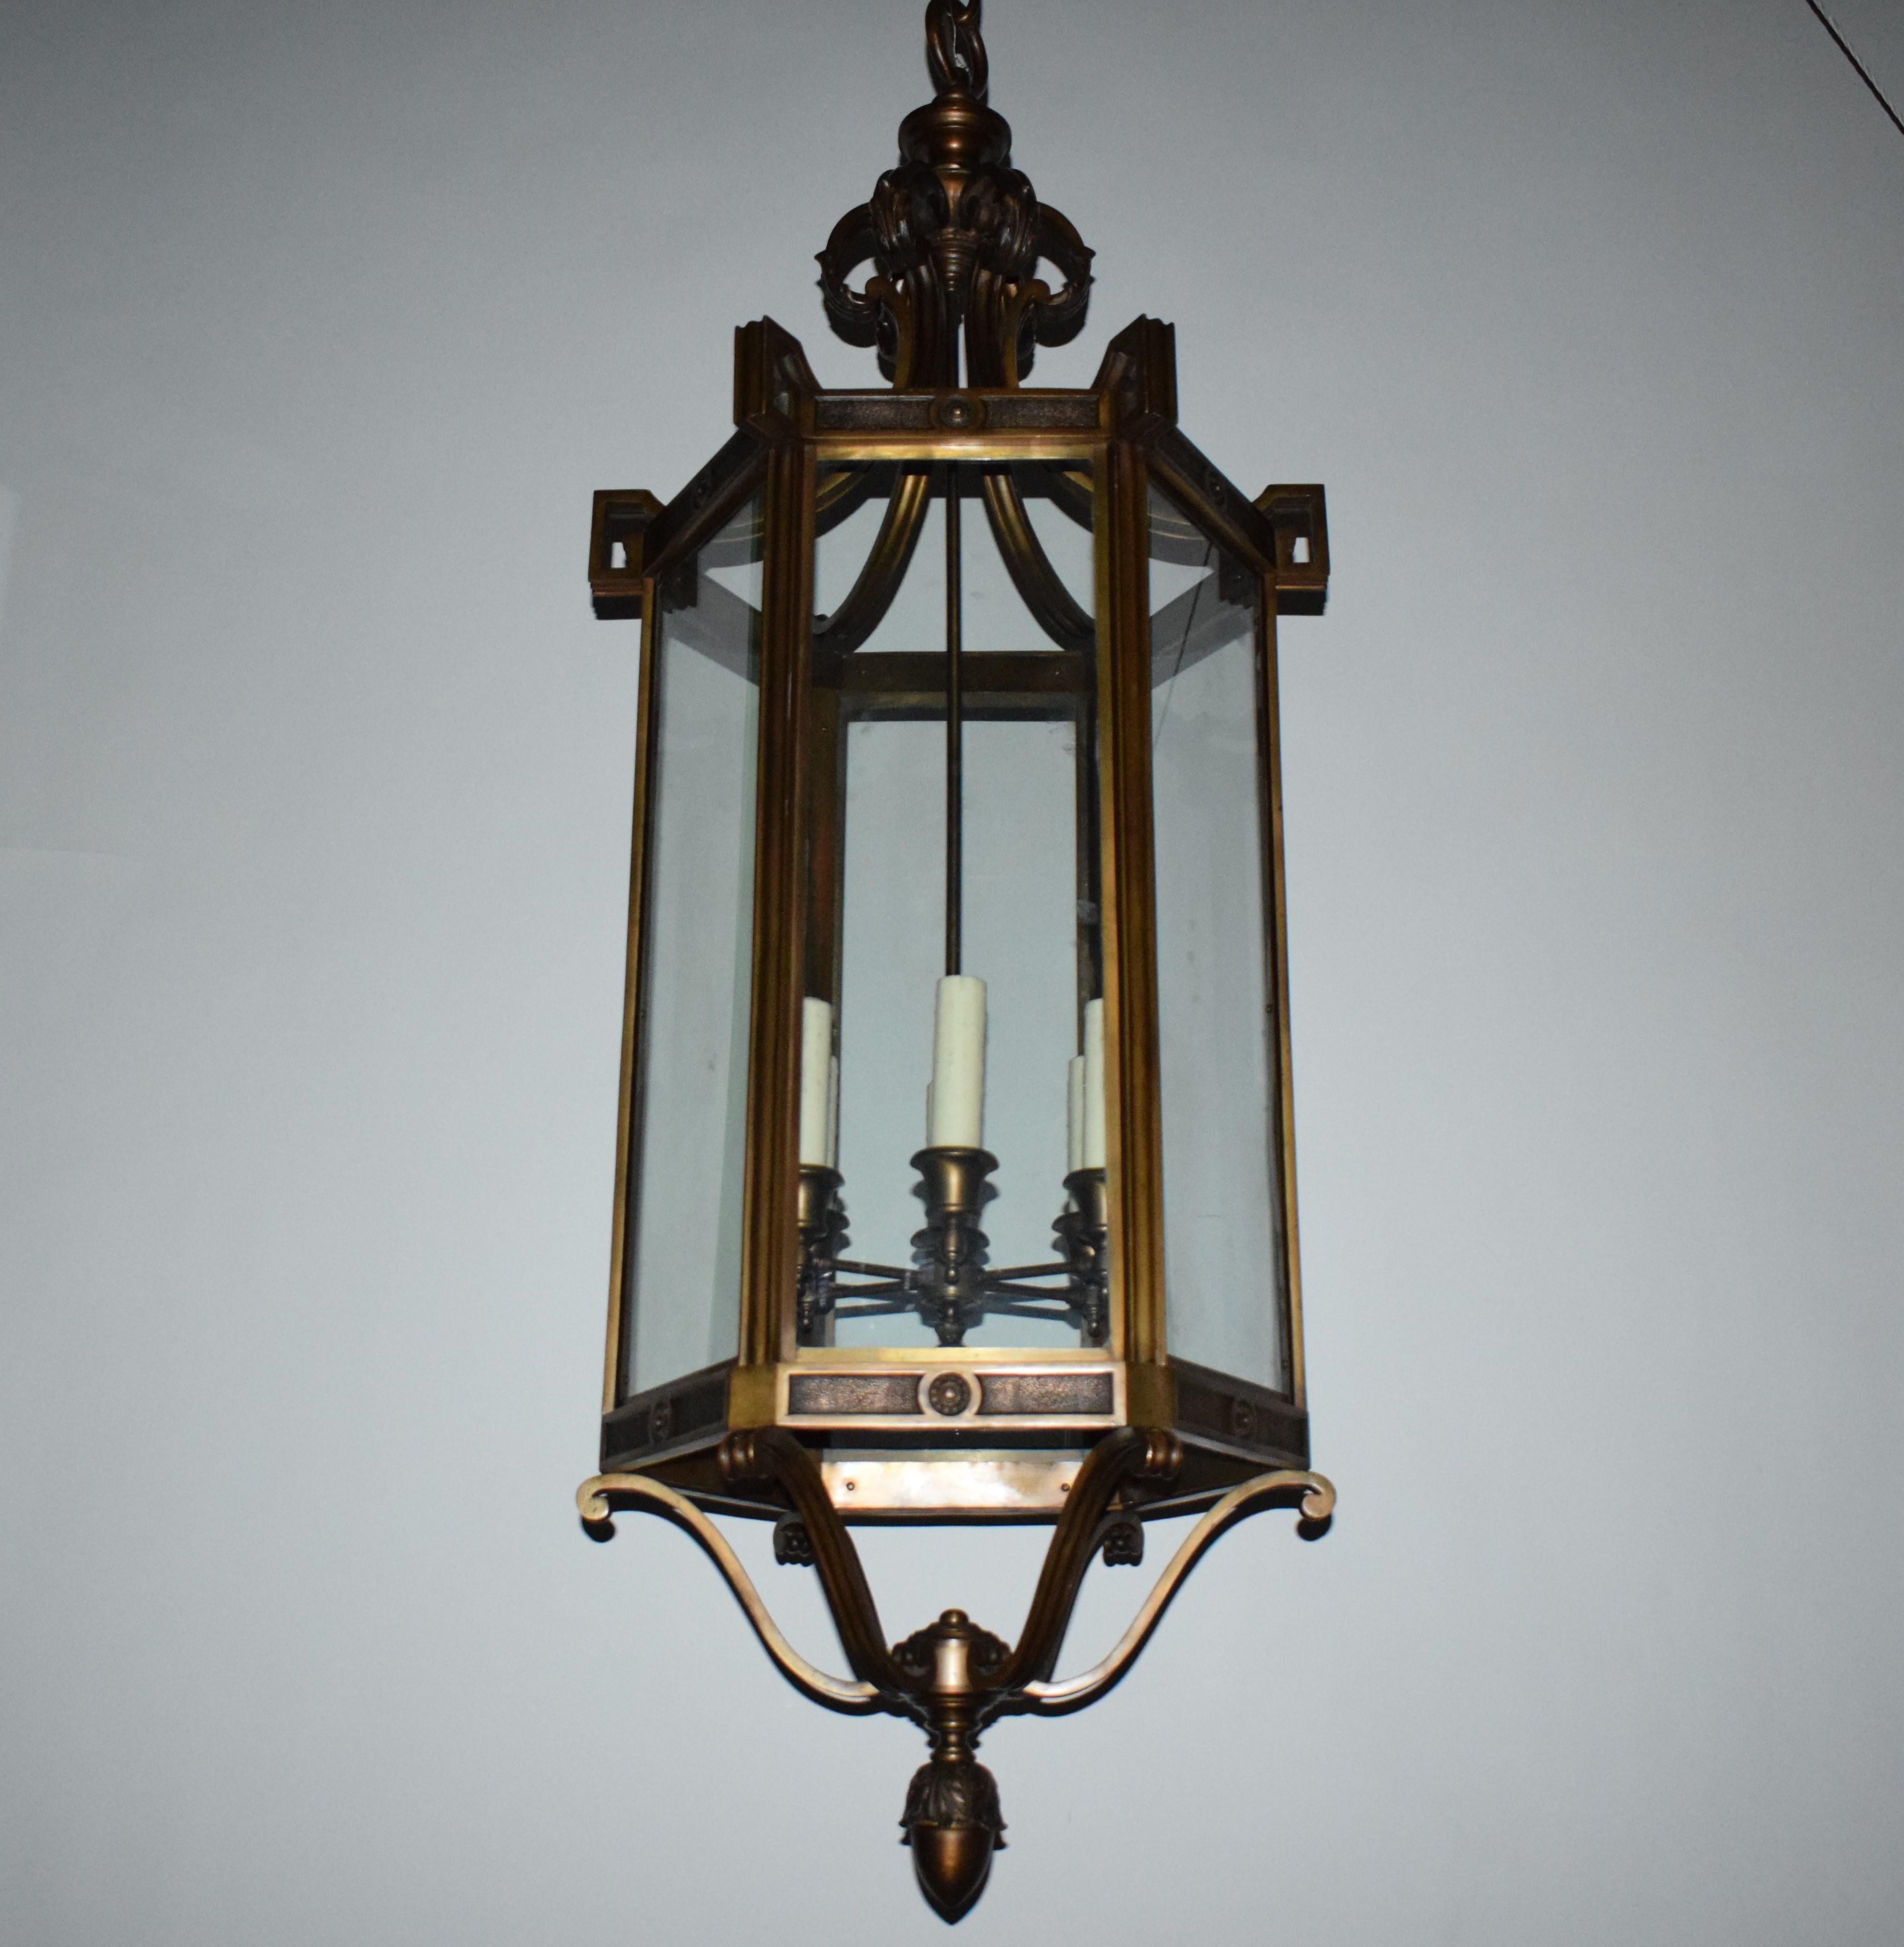 A magnificent bronze lantern attributed to E. F. Caldwell. Hexagonal in shape with beveled glass panels supported at the top by six brackets ending in Greek keys. At the bottom six 